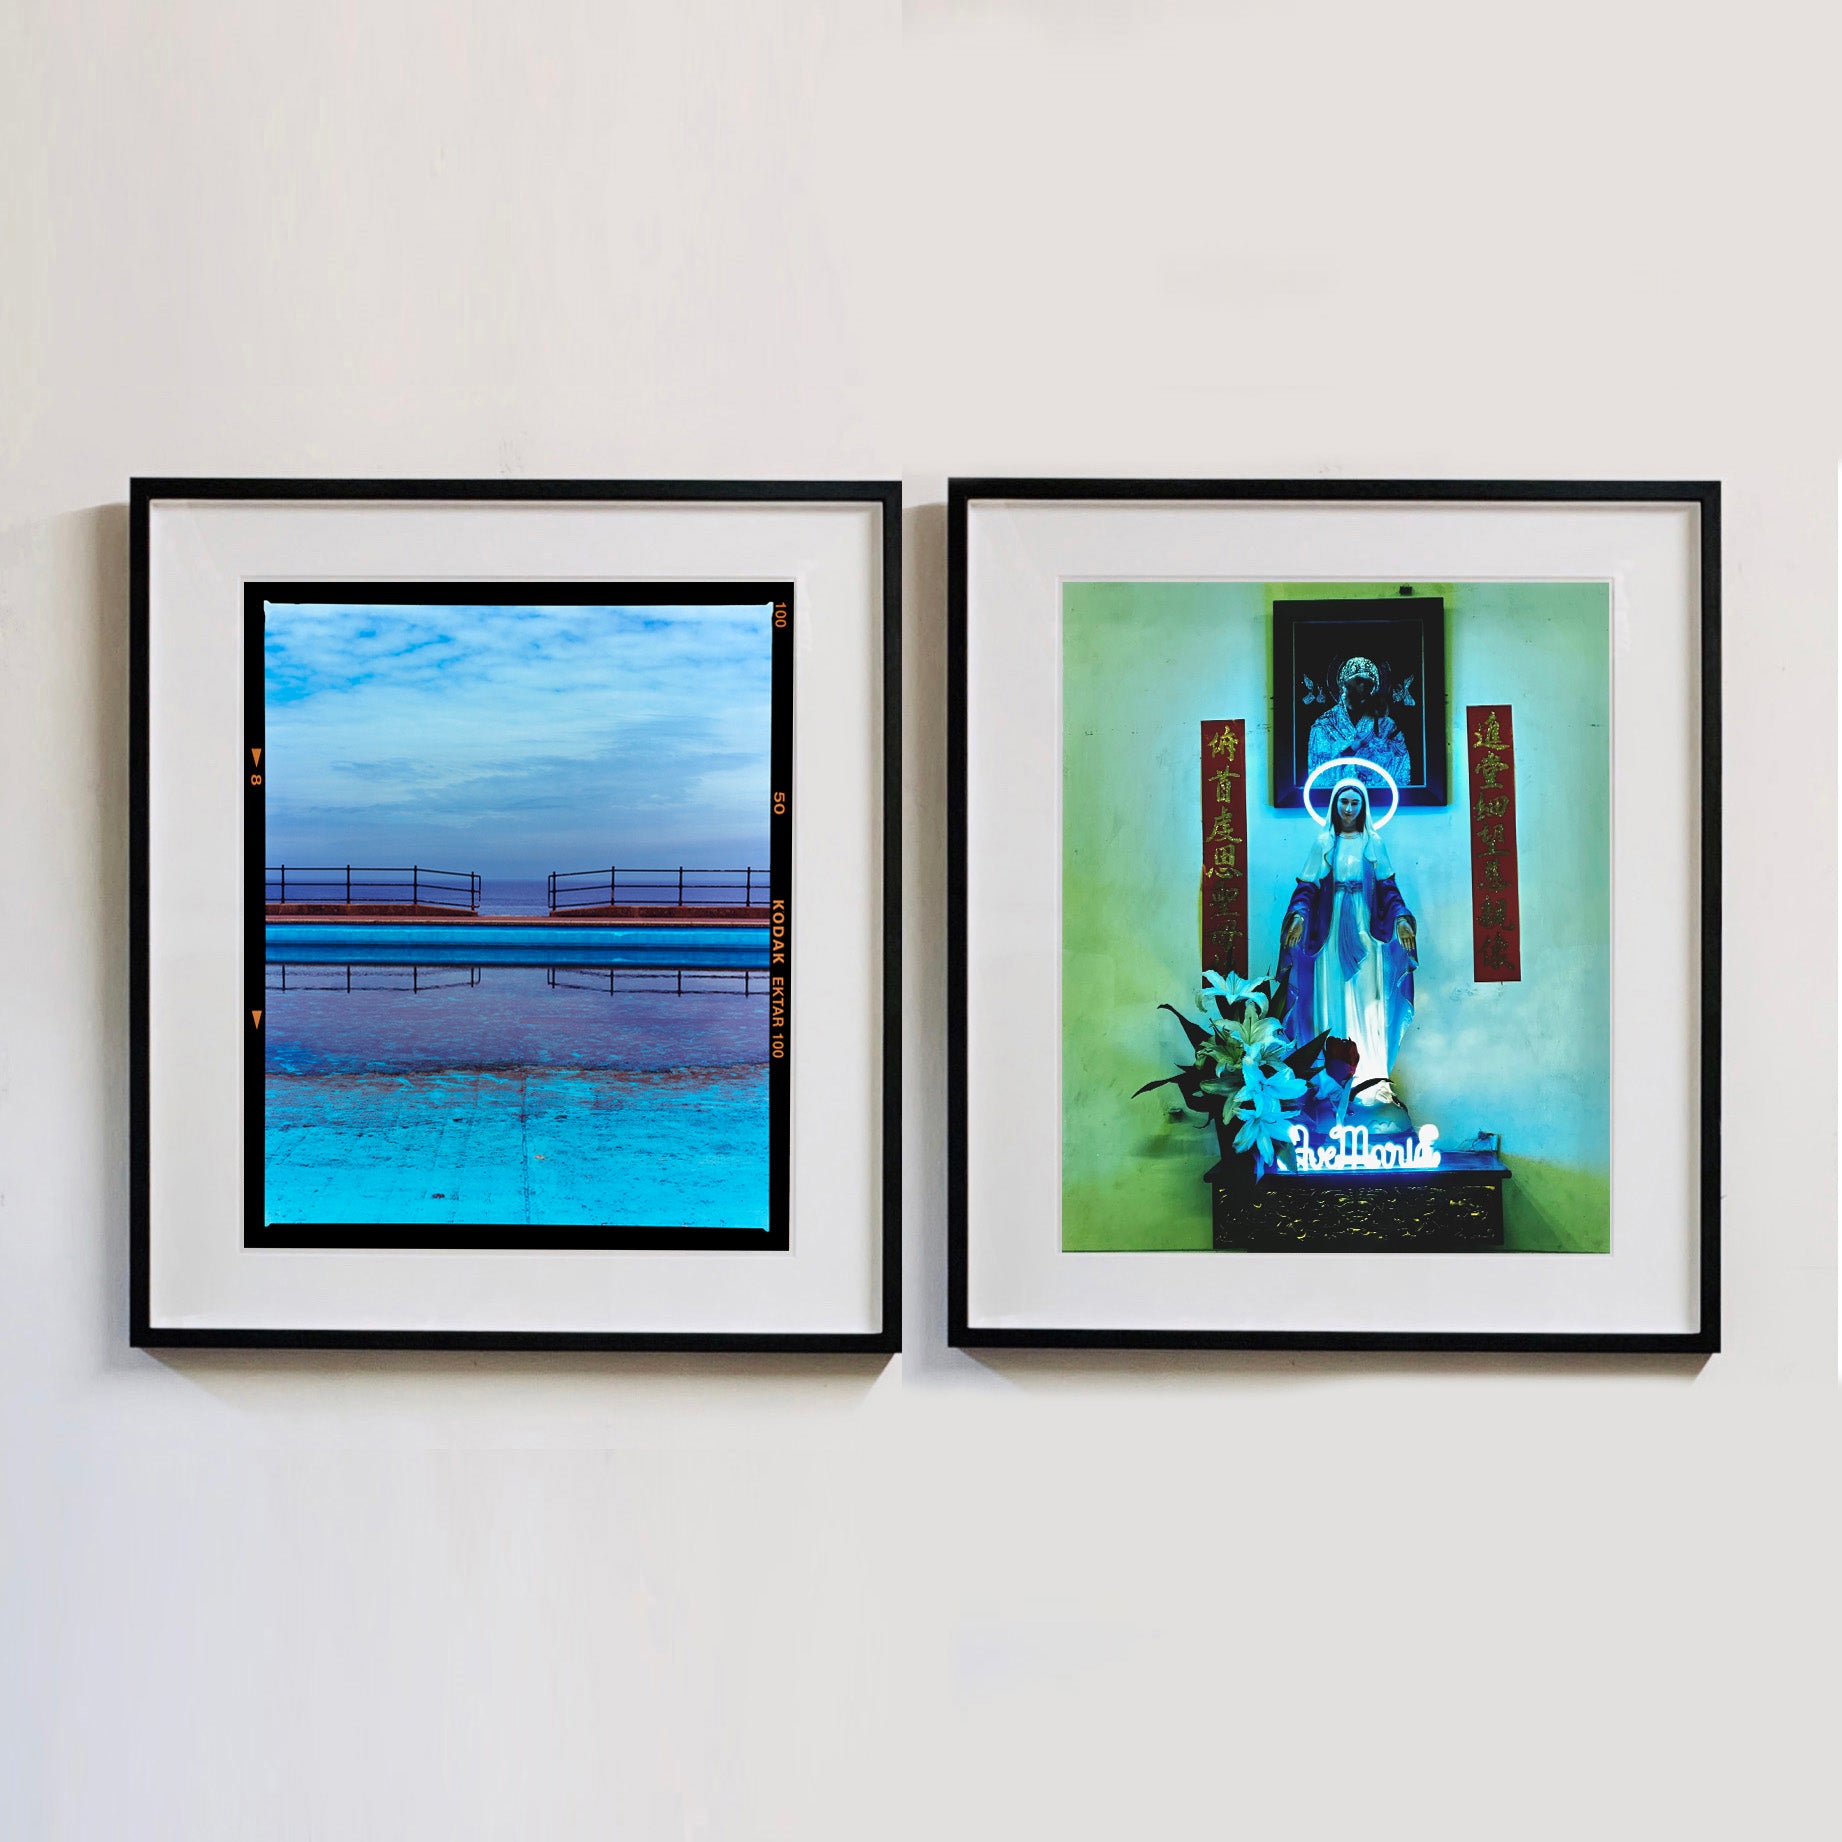 Two photographs by Richard Heeps. The photograph on the left hand side depicts the blue bay at Llandudno, cut across the middle with path and railings with a gap right in the middle. The photograph on the right hand side is a neon lit Virgin Mary, with the words "Ave Maria" lit in Neon at the statues feet, the photograph is in a green and blue toned view.